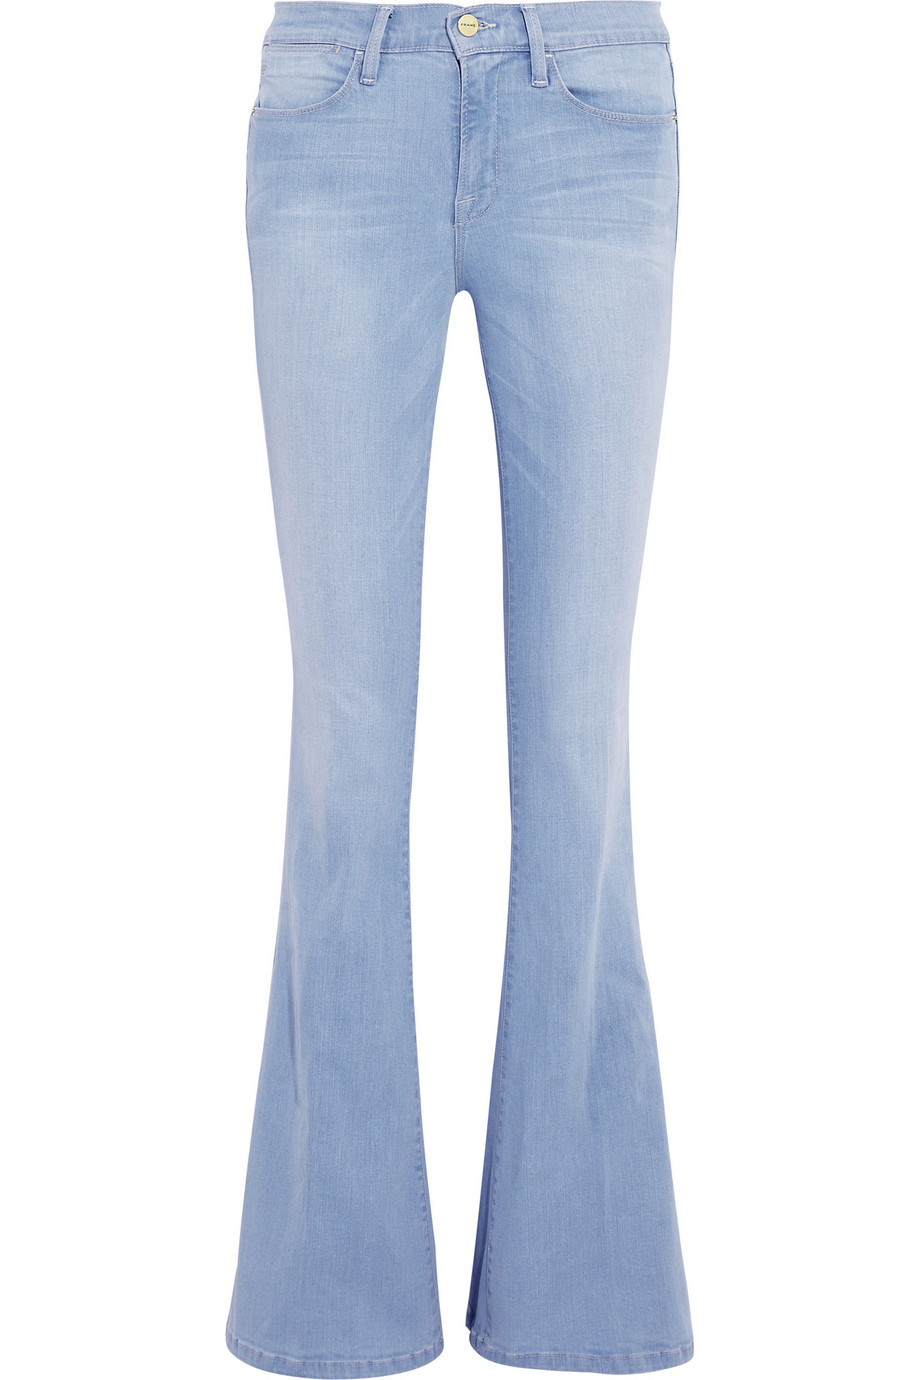 Lyst - Frame Le High Flare High-Rise Jeans in Blue